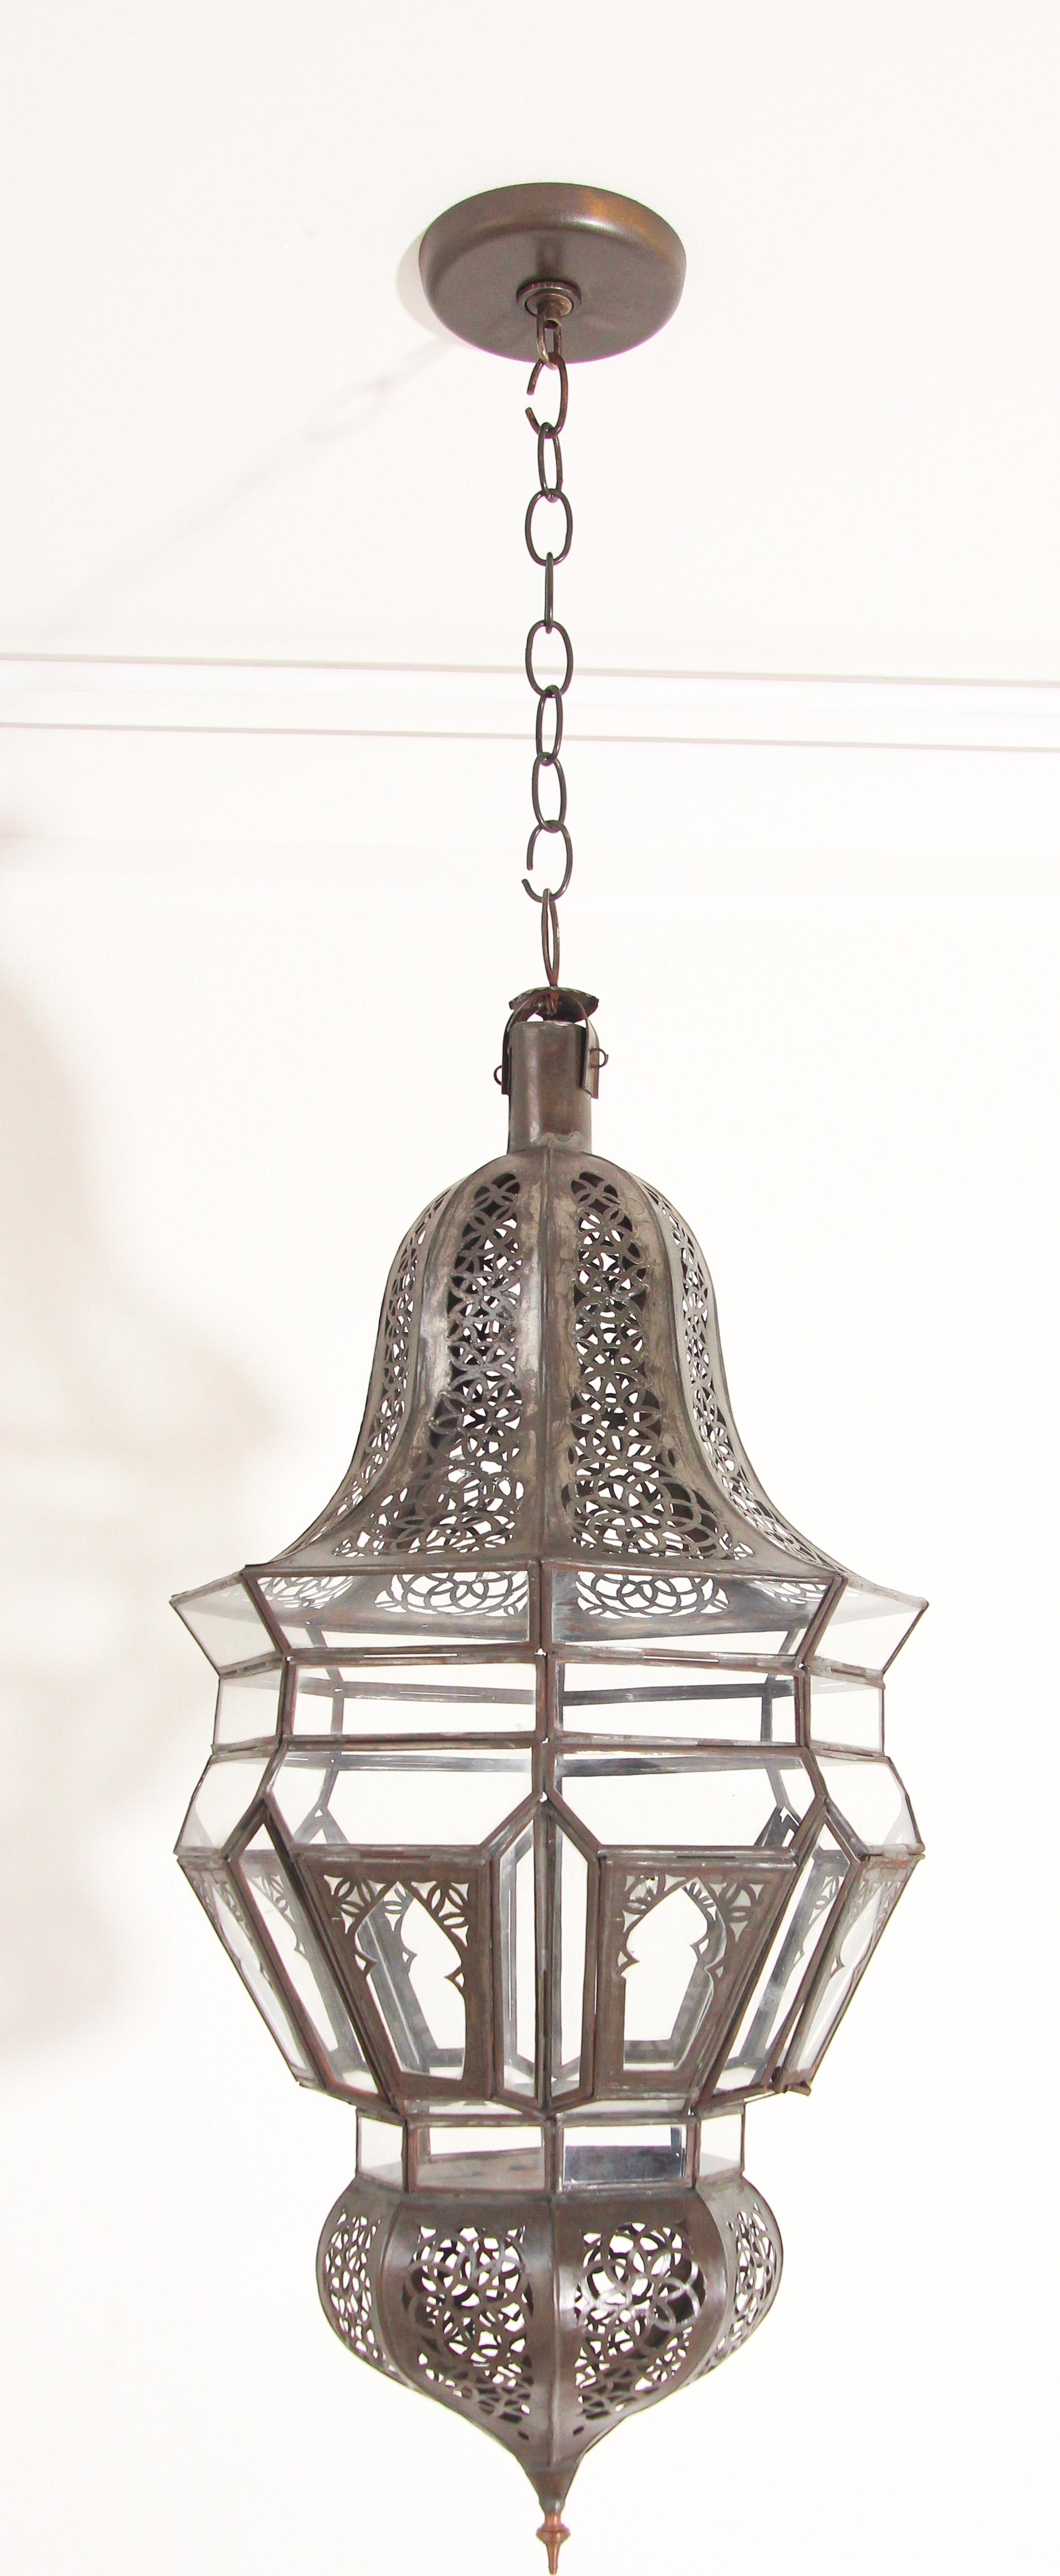 Moroccan Moorish clear glass with intricate metal filigree hanging Harem lantern.
Moroccan Hanging Glass Lantern delicately handcrafted by artisans in Morocco.
Bronze metal color finish.
This is just a lantern shade.
Does not come with any